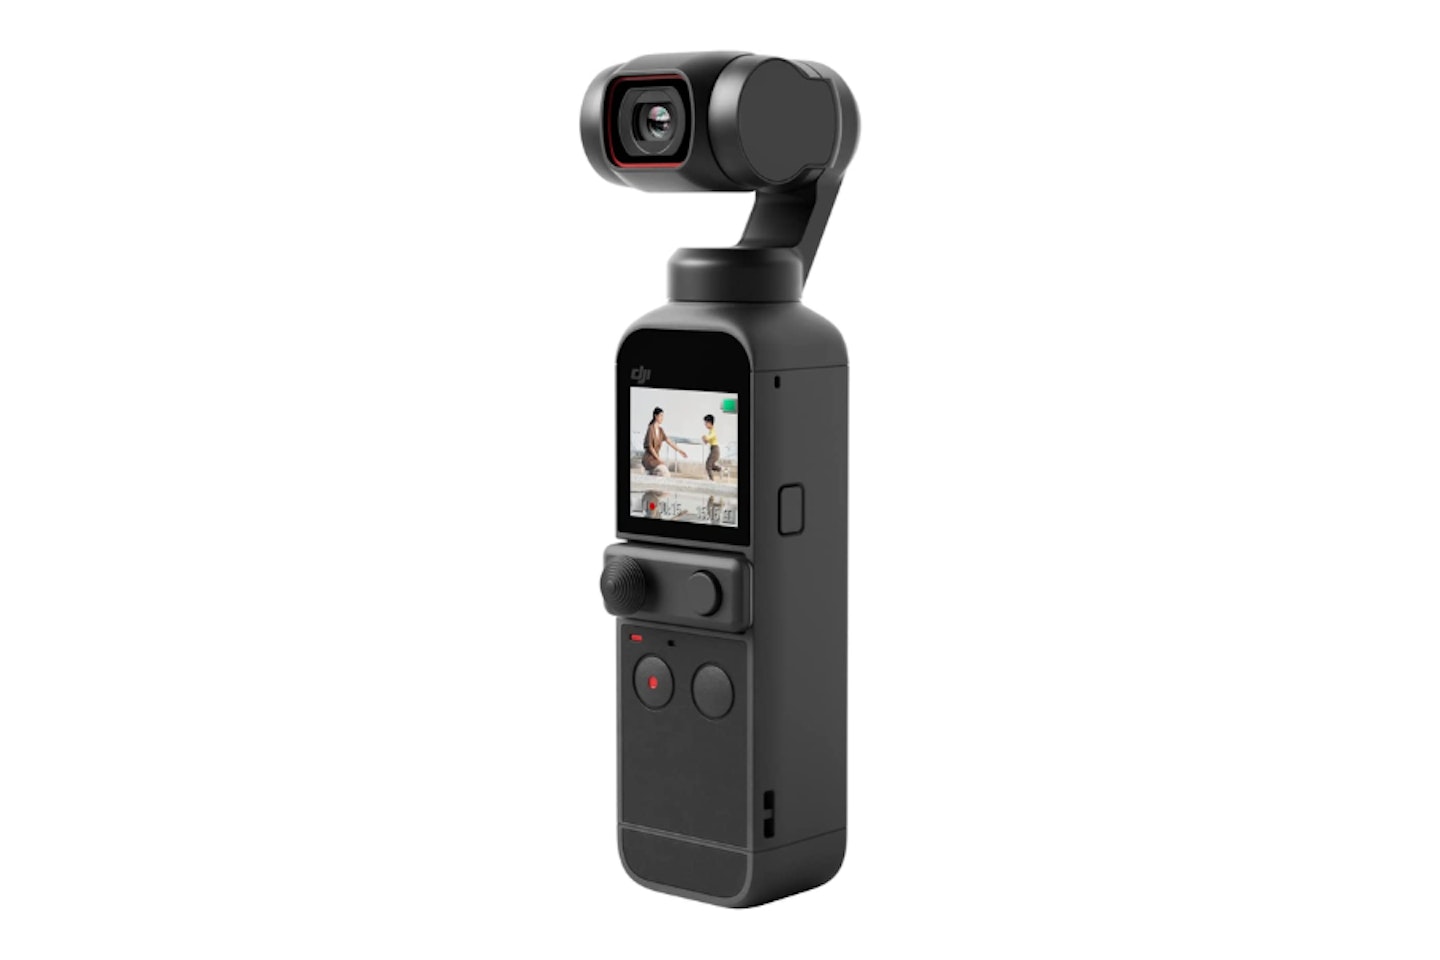 DJI Pocket 2 - Handheld 3-Axis Gimbal Stabilizer with 4K Camera - one of the best low-budget video cameras